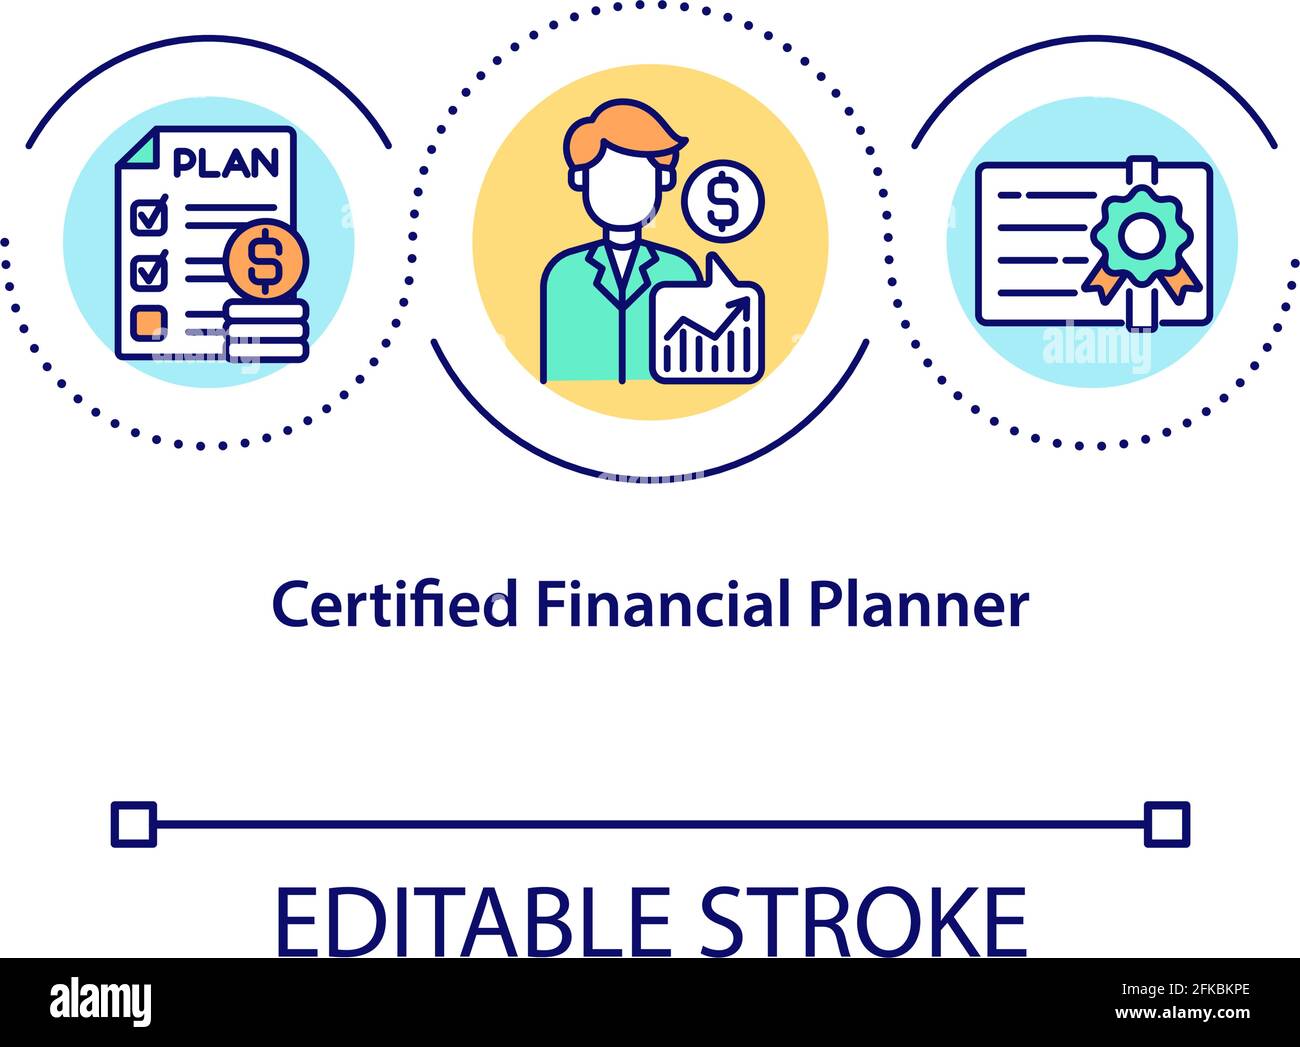 Certified financial planner concept icon Stock Vector